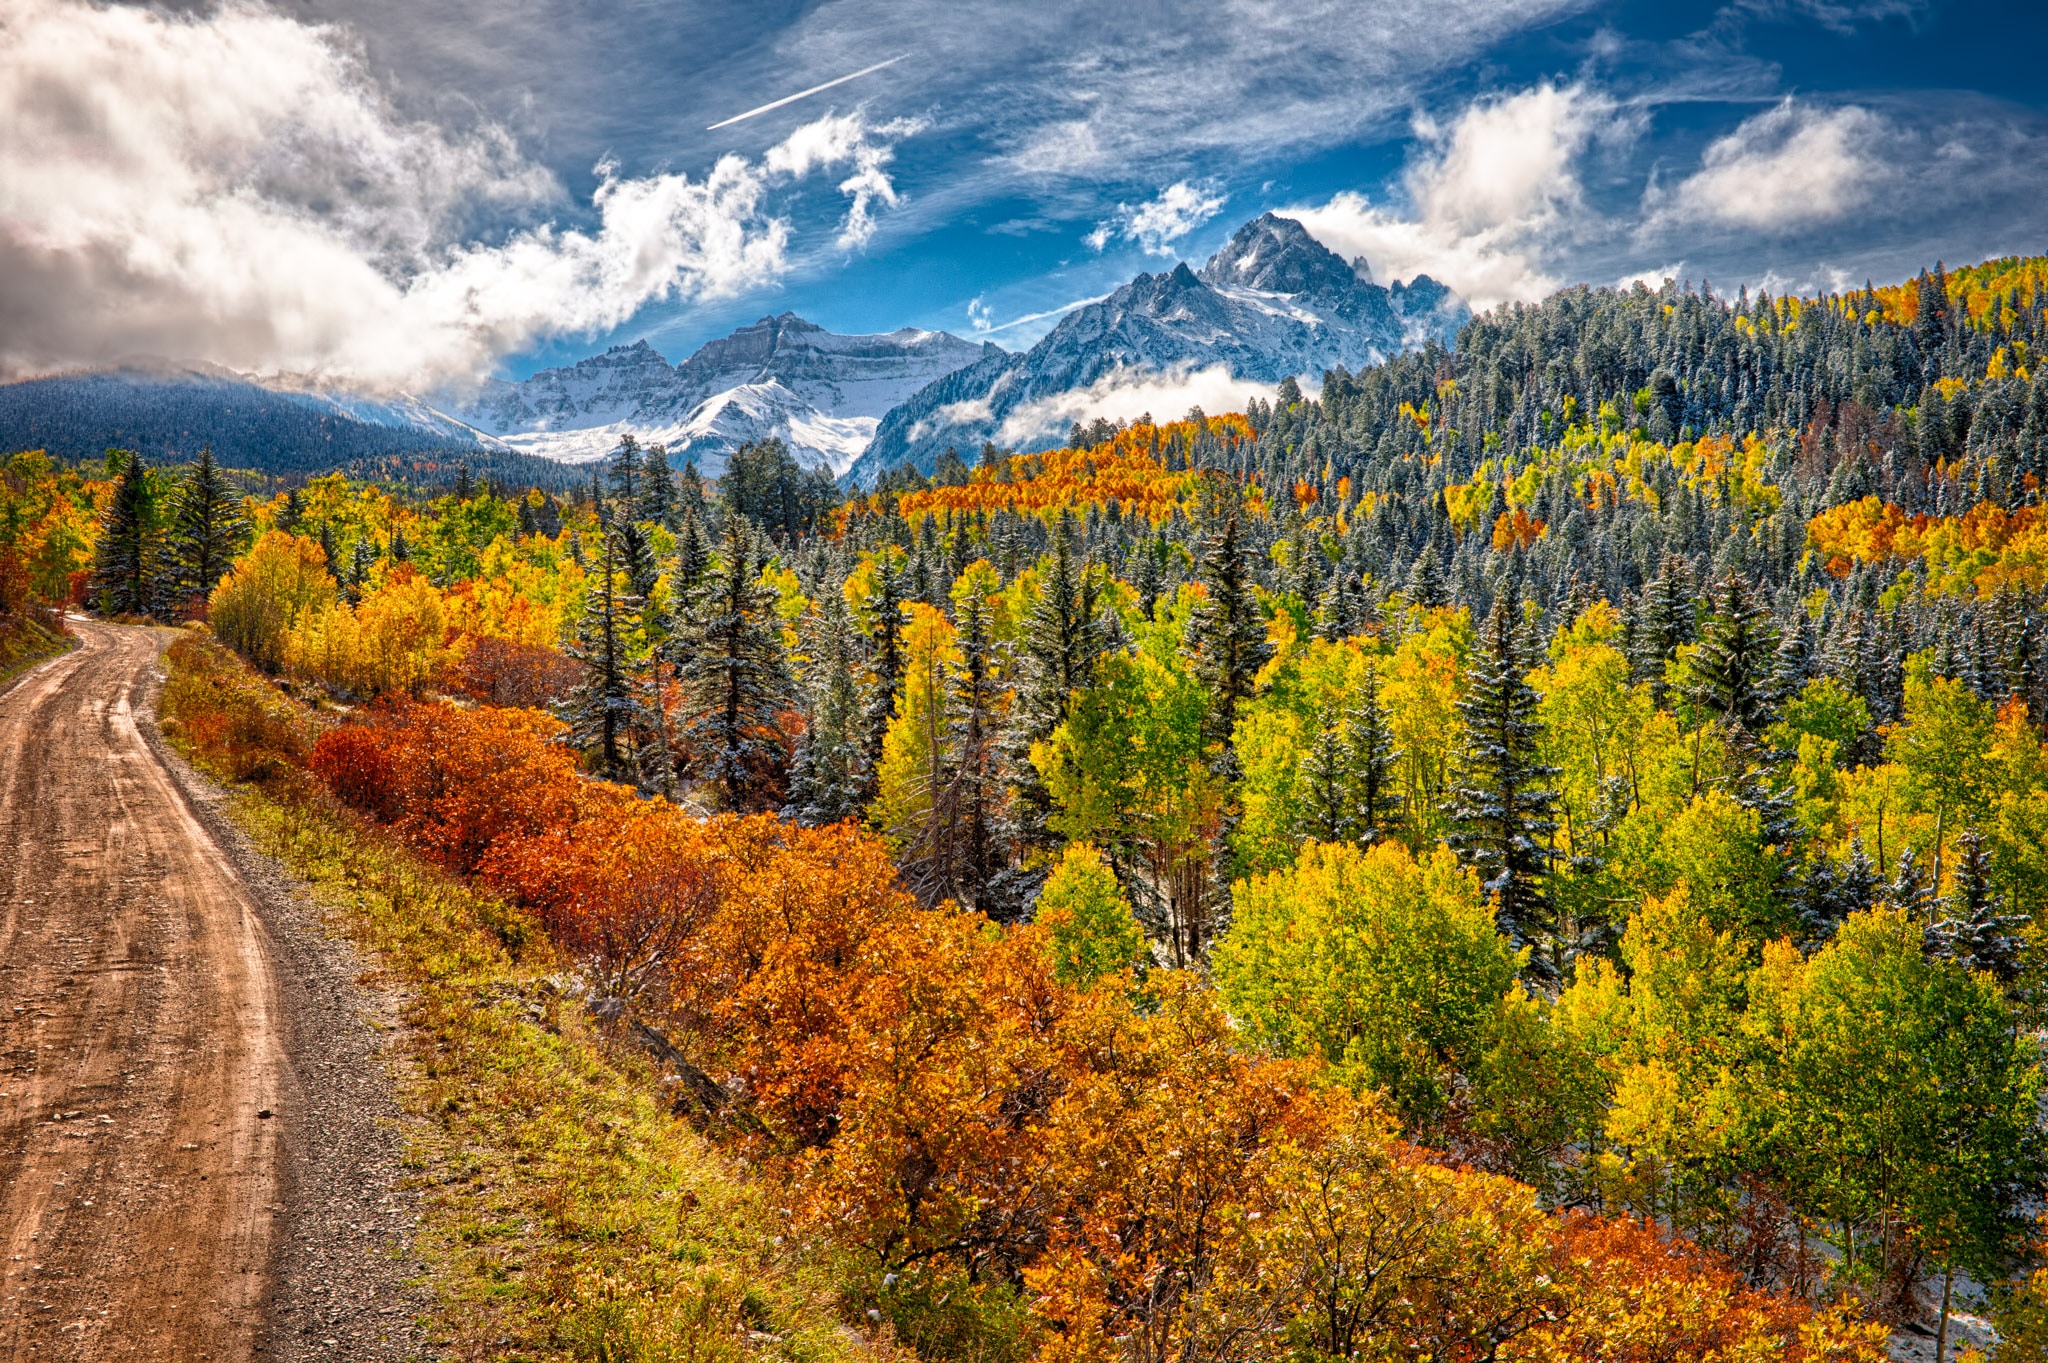 Colorful aspens and Gambel oaks treat the eye along CR 7 near Ridgway, Colorado, with the snow-capped mountains of the Sneffels Wilderness in the distance.